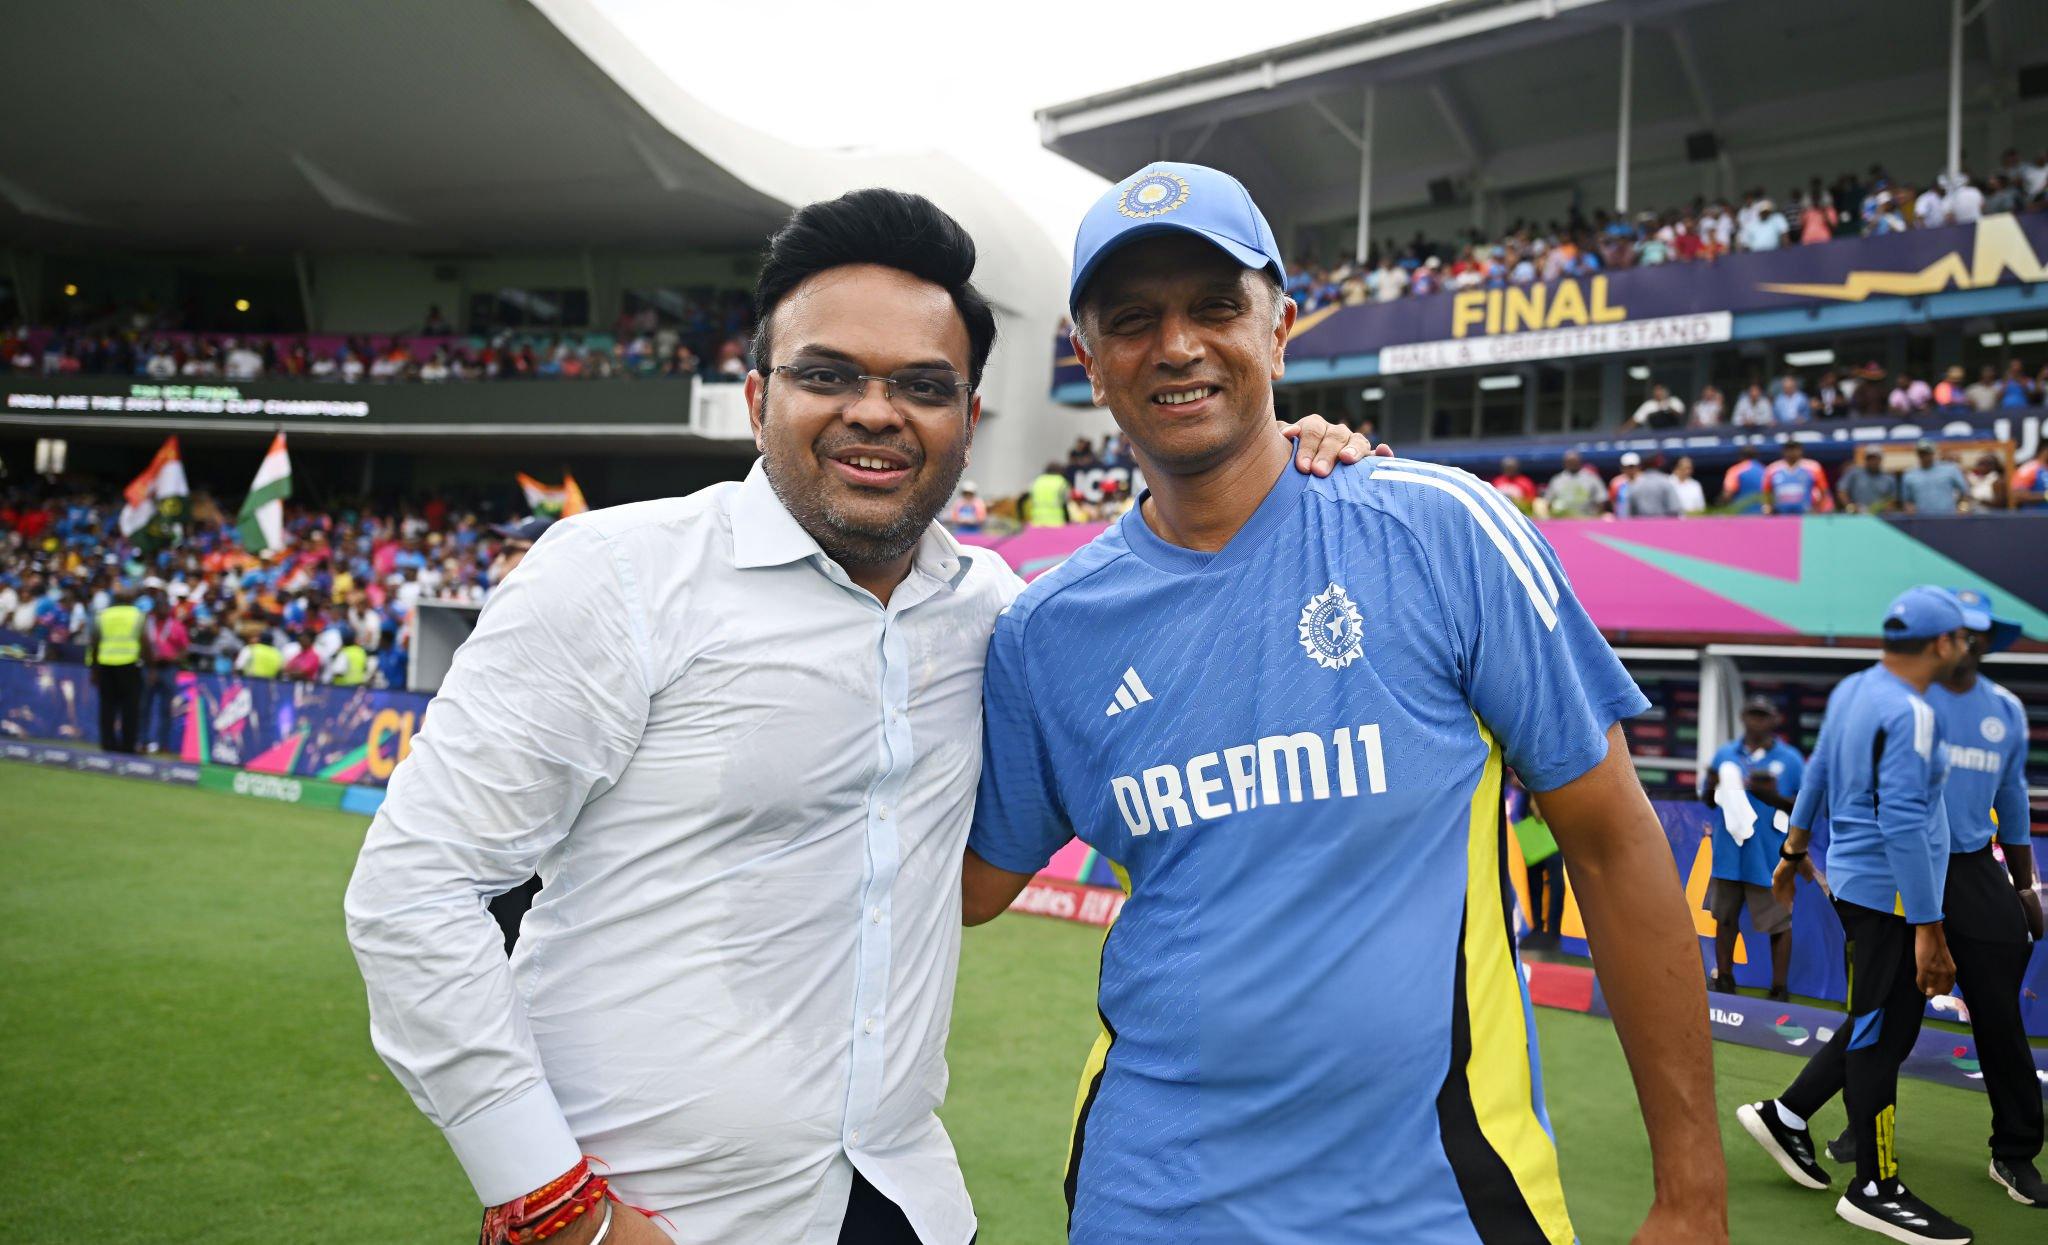 ‘We respect his decision’ - Jay Shah reveals reason behind Rahul Dravid not re-applying for head coach role